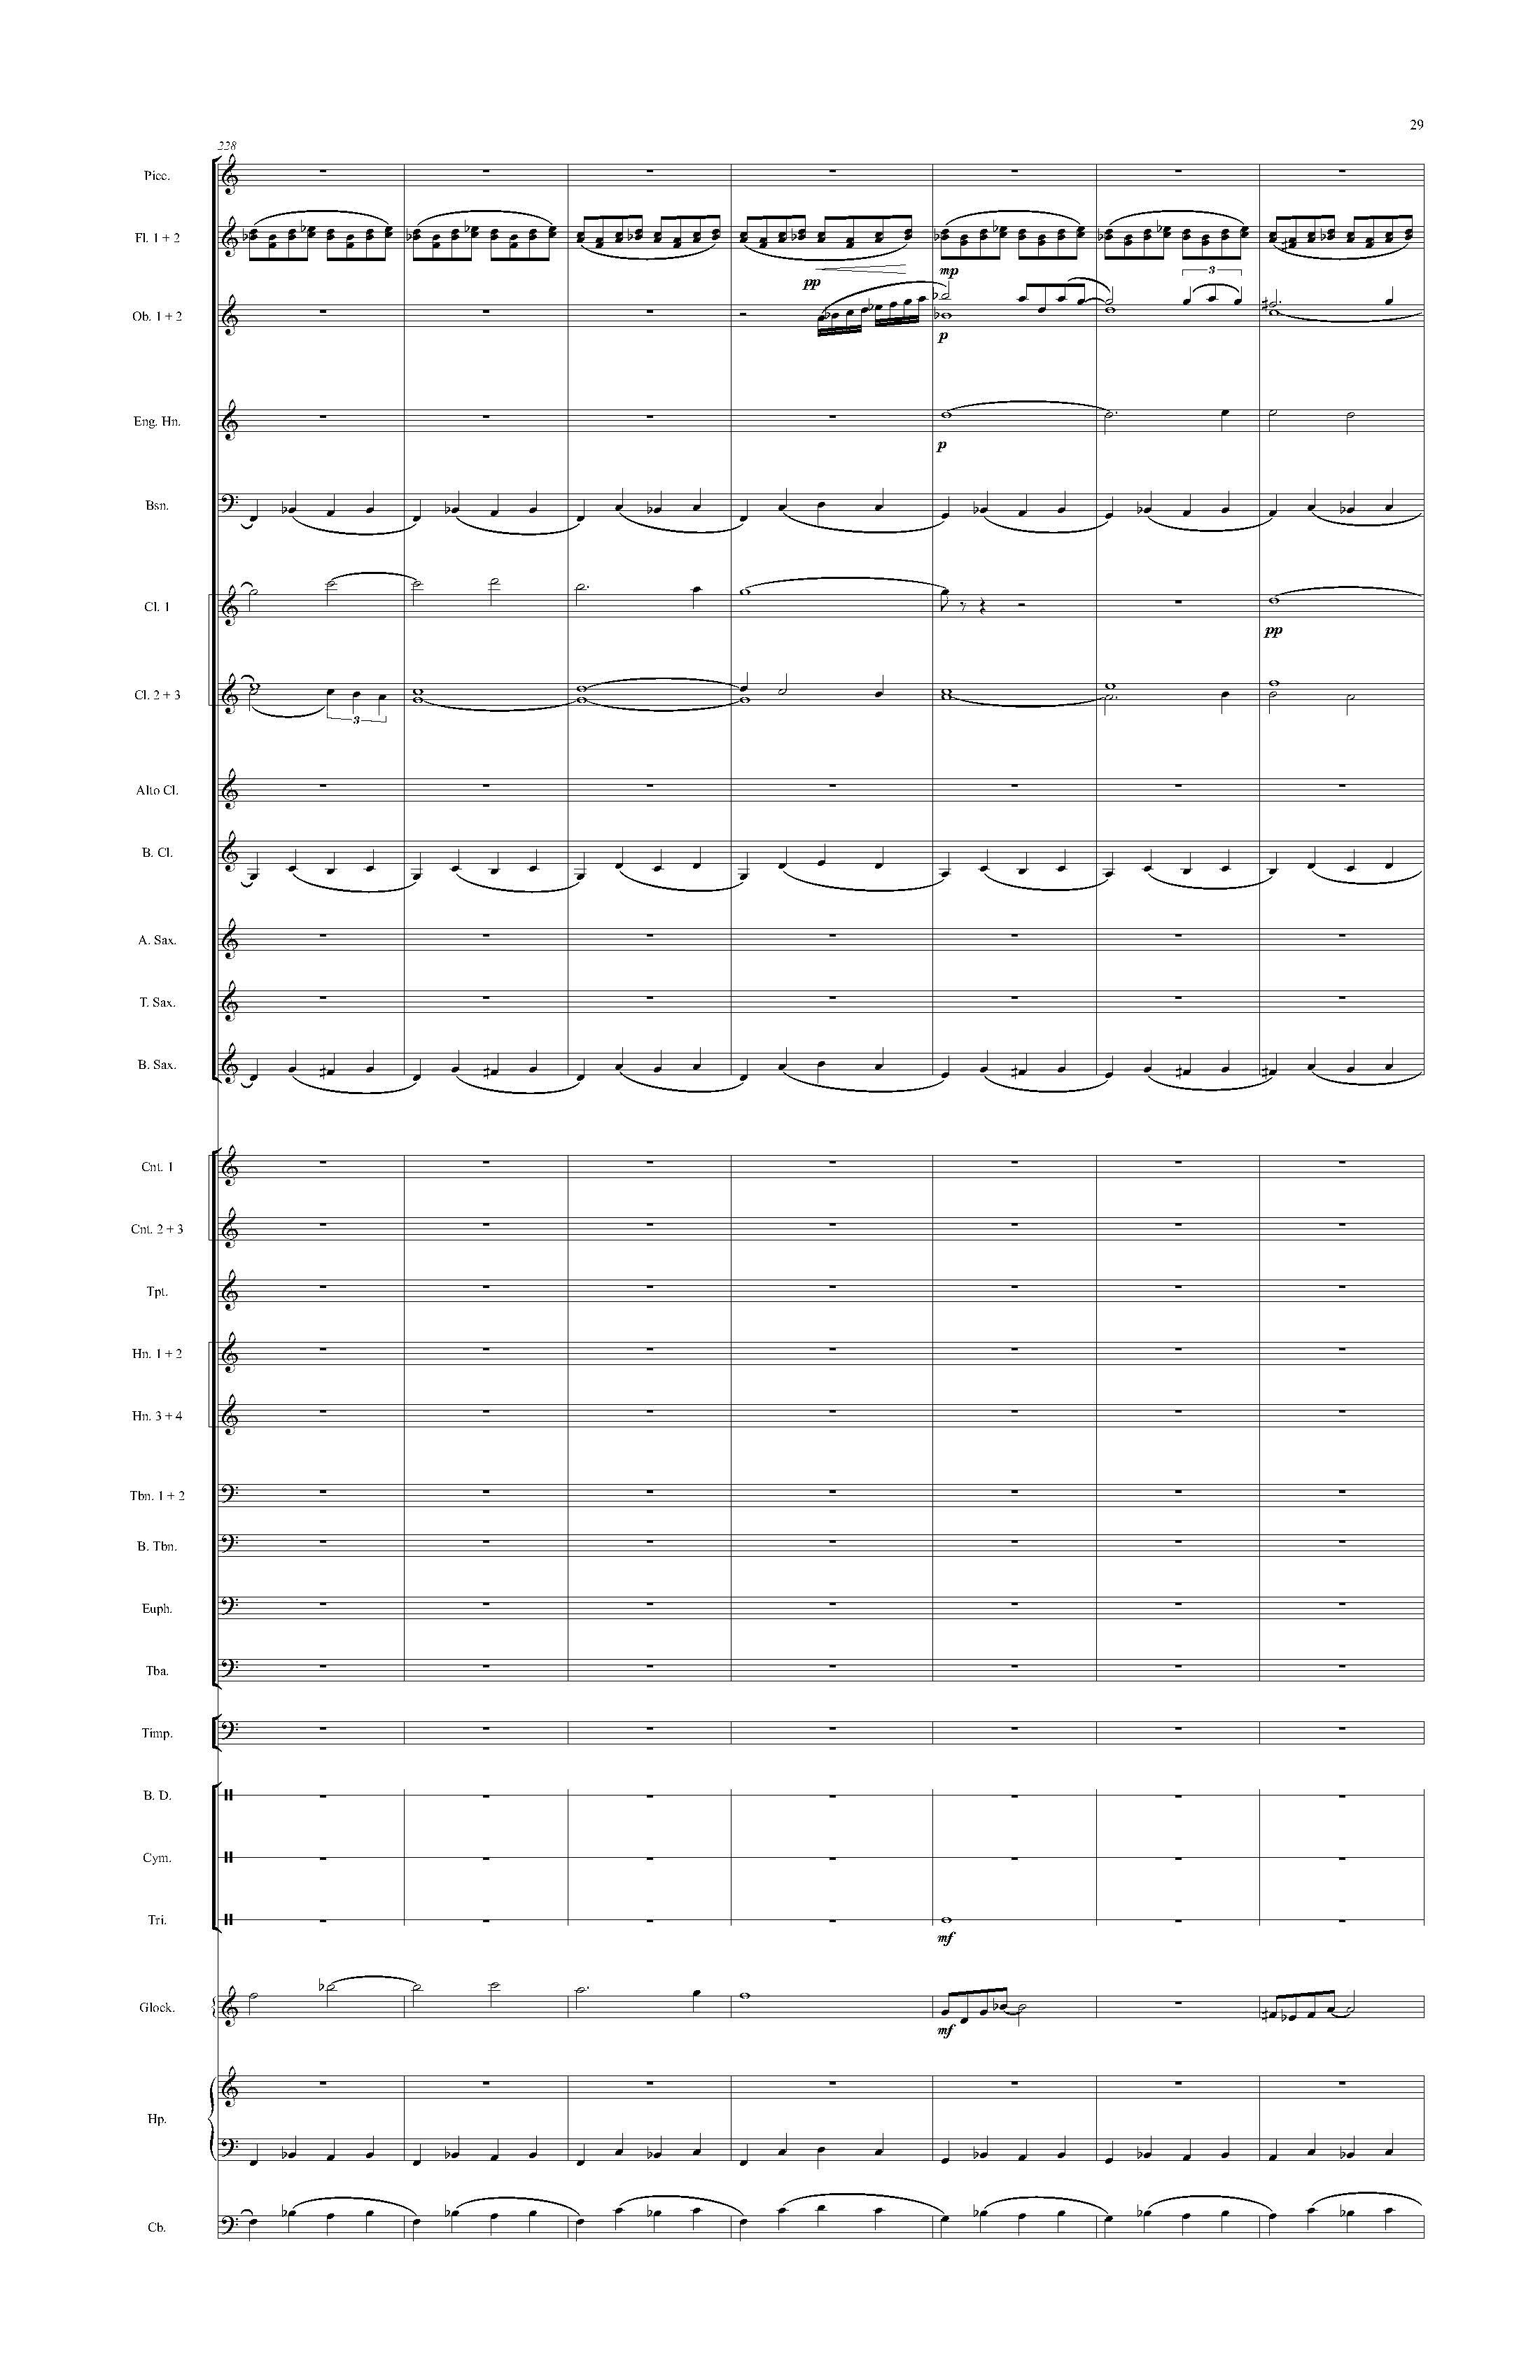 Psyche - Complete Score_Page_35.jpg